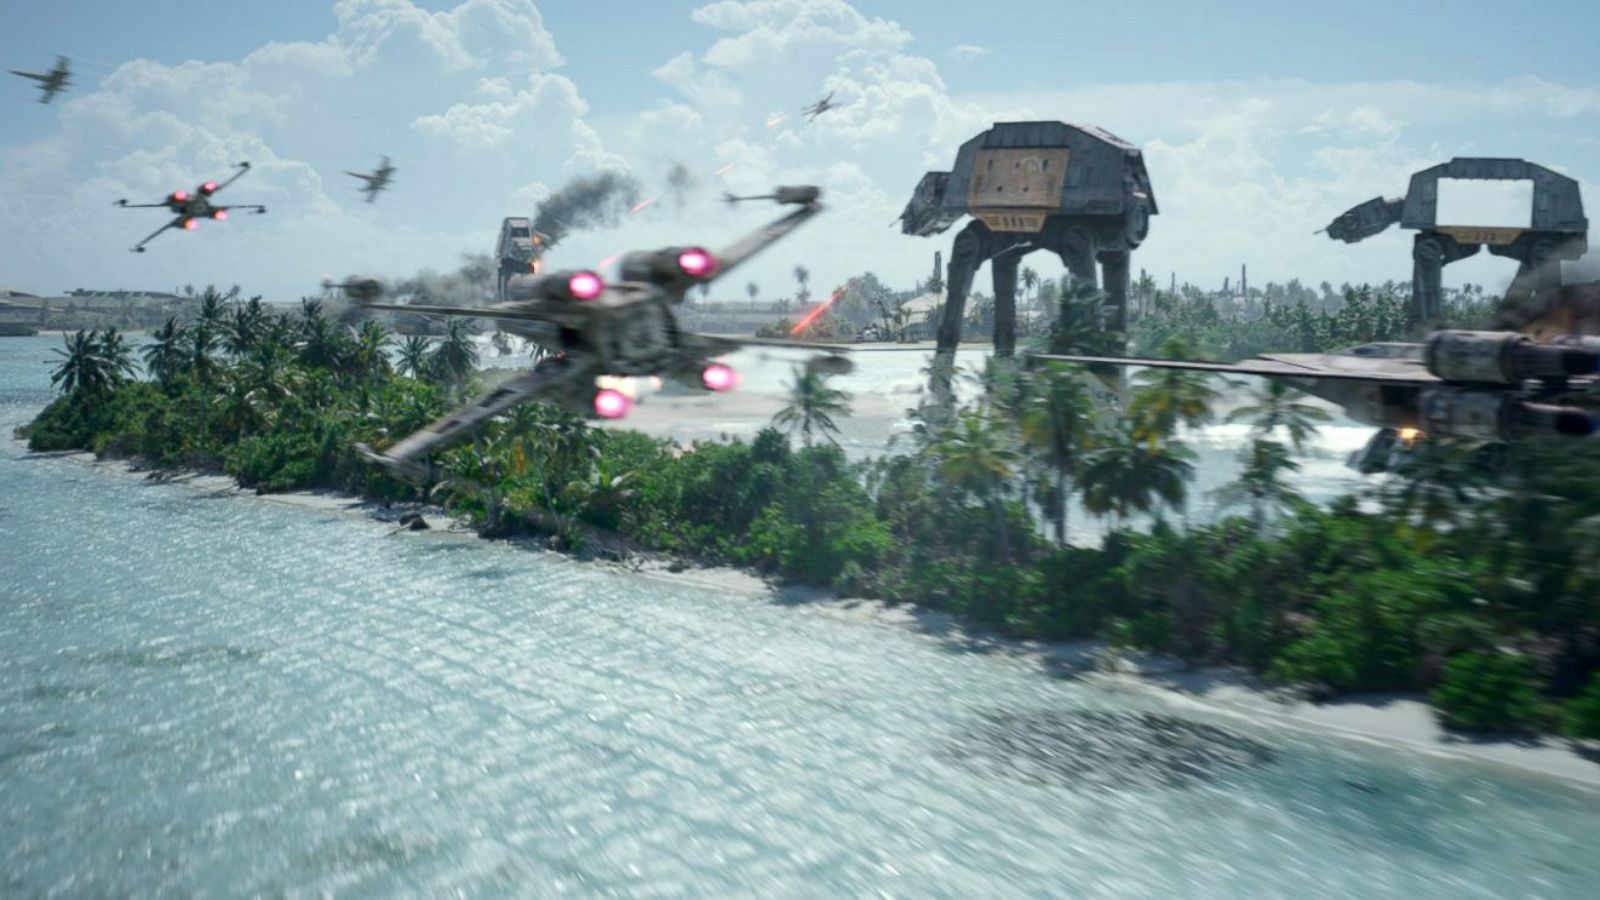 How The Oscar Nominated Effects For 'Rogue One' Were Made